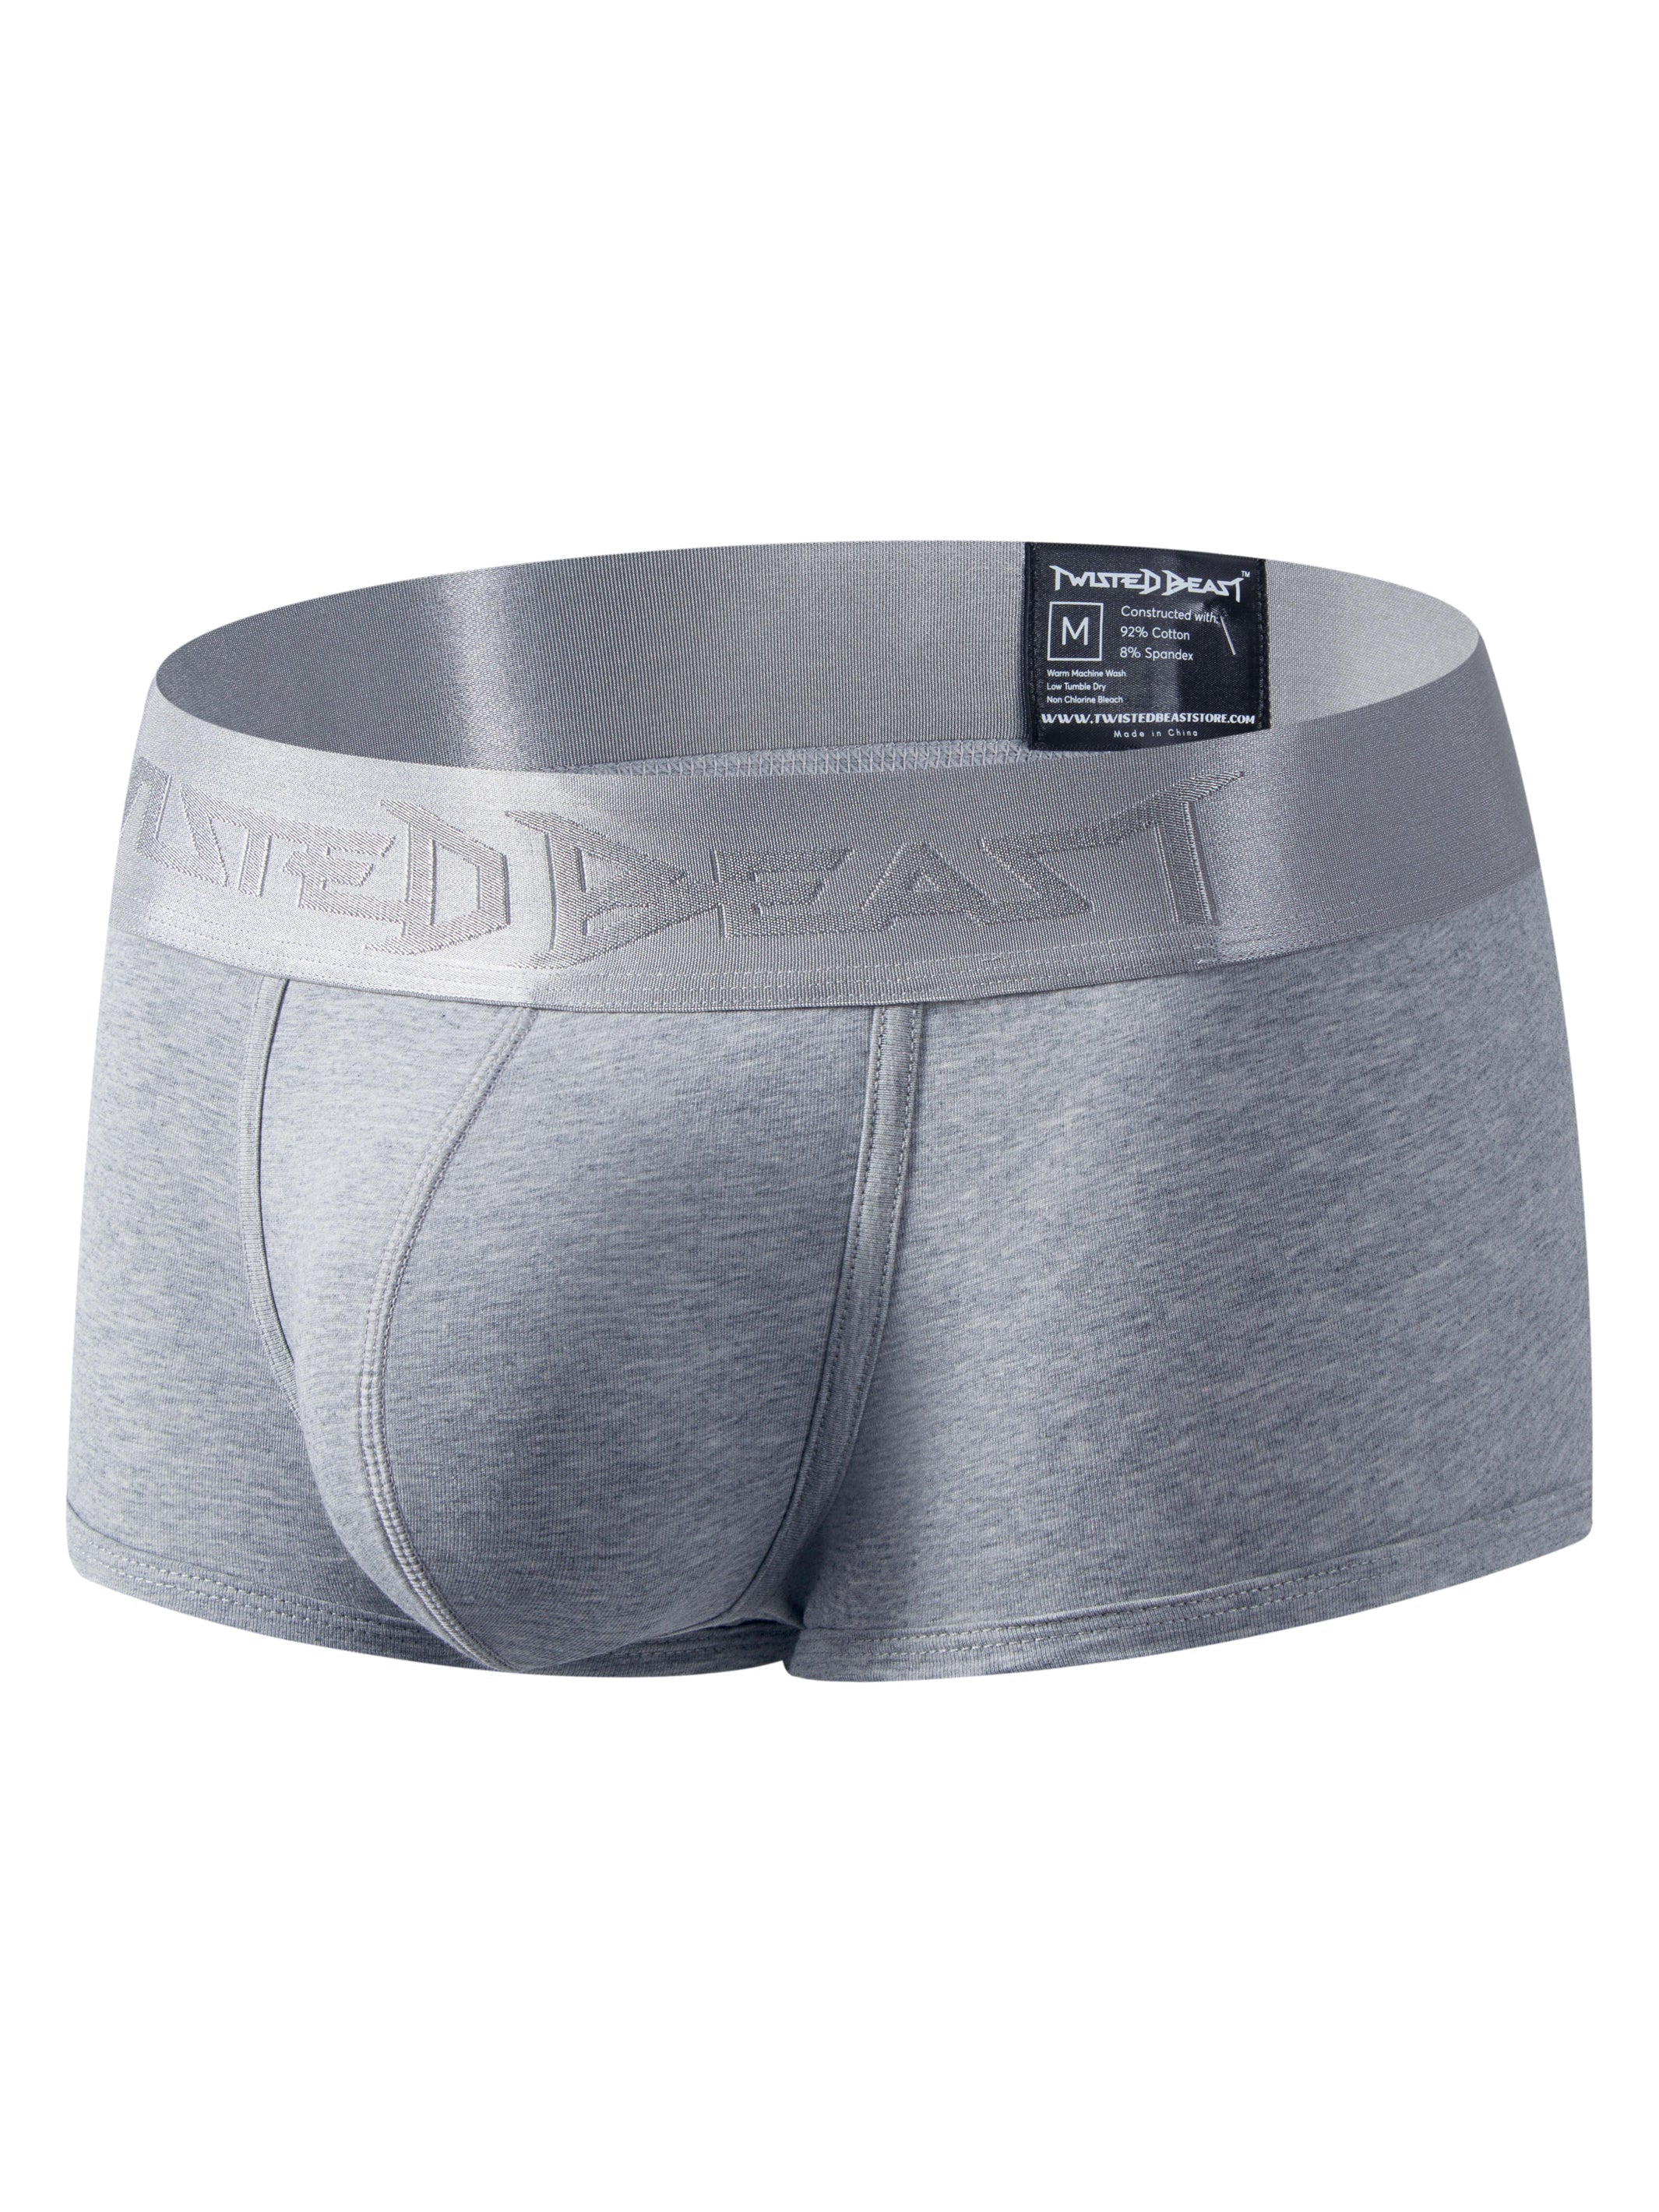 A product photo of some Grey Phantom Boxers.